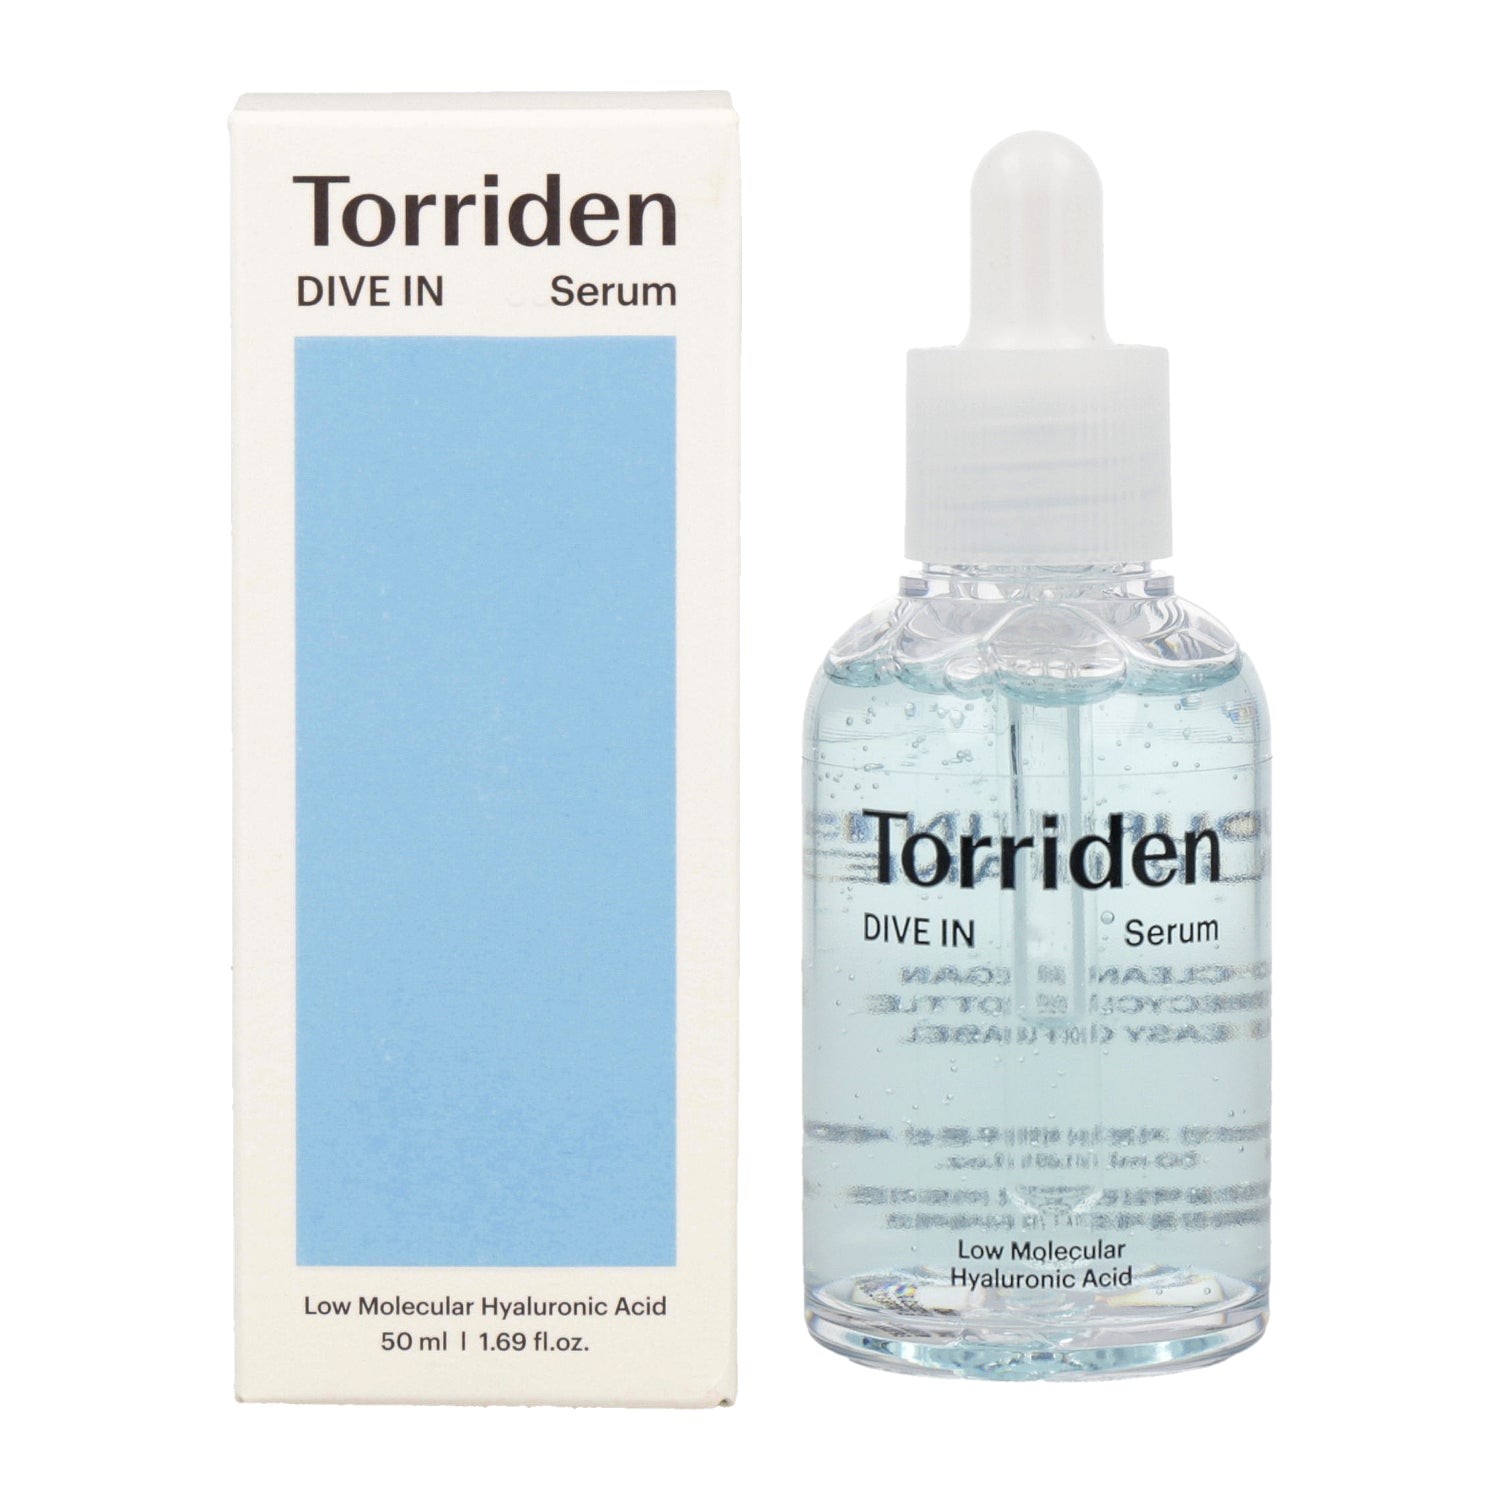 Torriden *renew* Dive-In Low Molecule Hyaluronic Acid Serum 50ml -  is a hydrating and replenishing serum designed to provide intense moisture